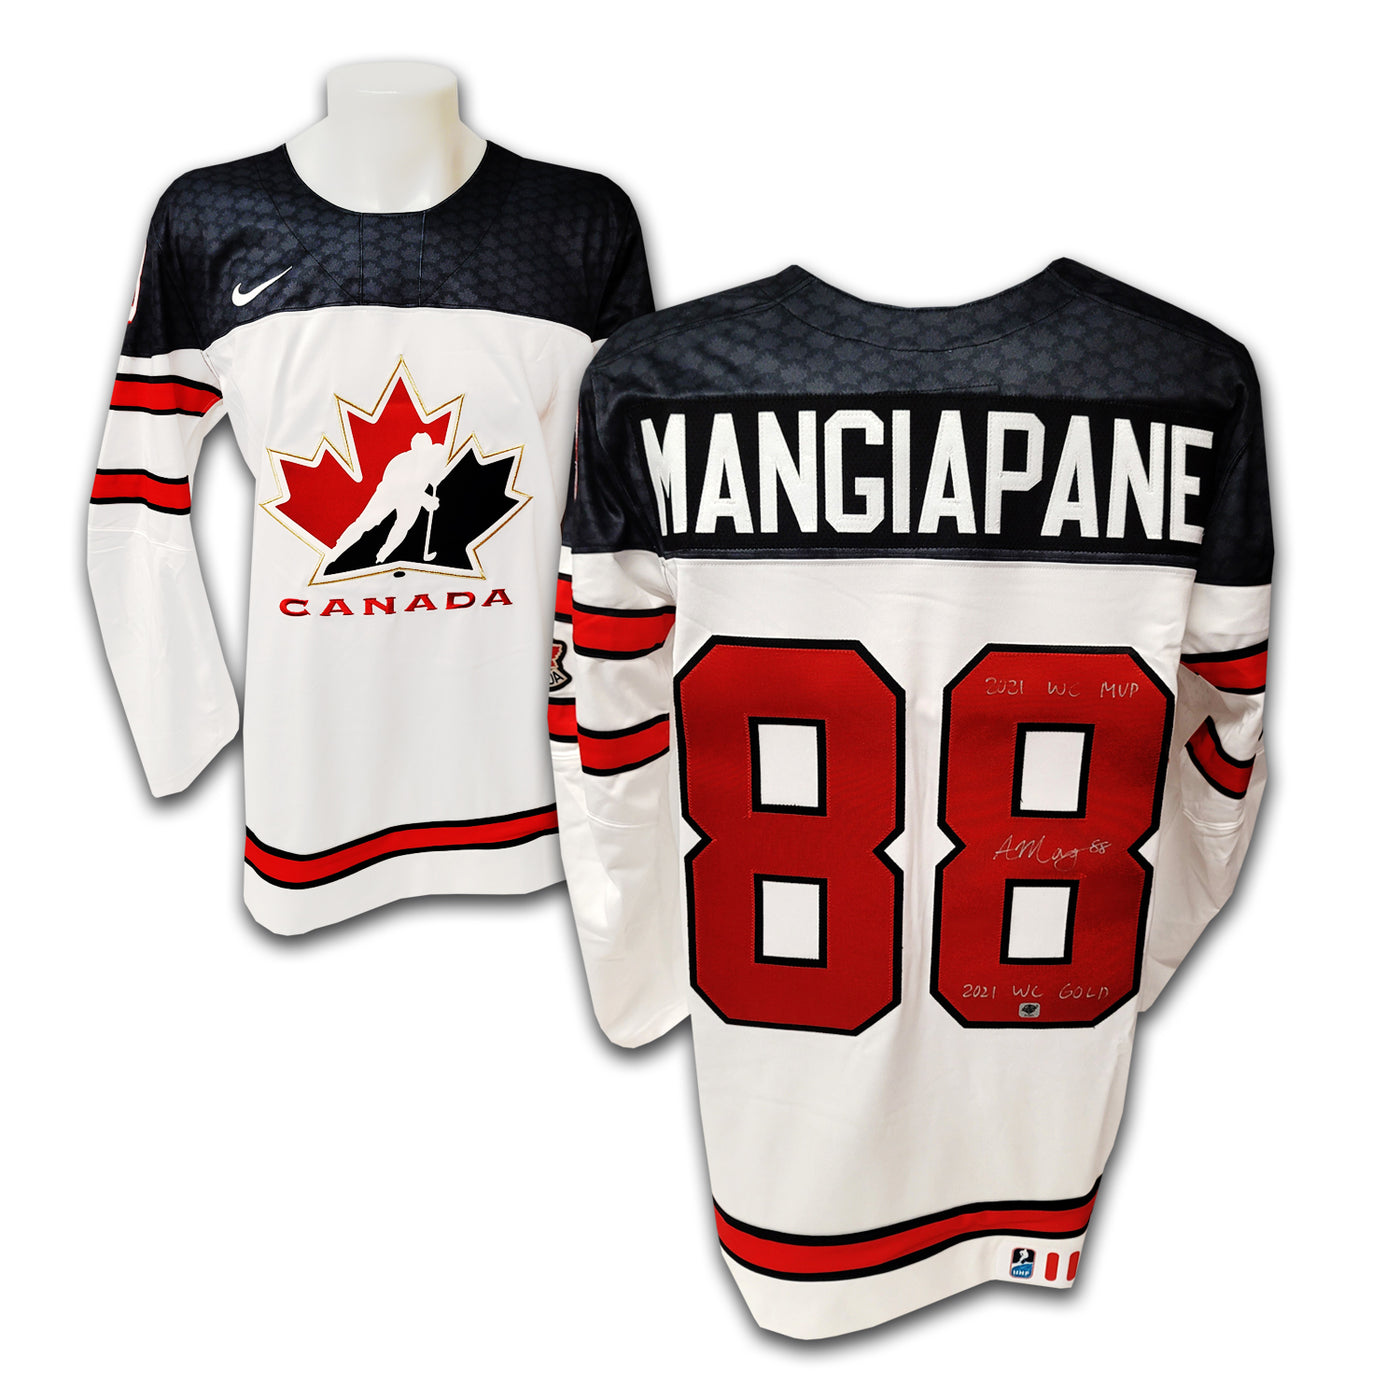 Andrew Mangiapane Team Canada 2021 White Nike Jersey Inscribed 2021 WC Gold / MVP